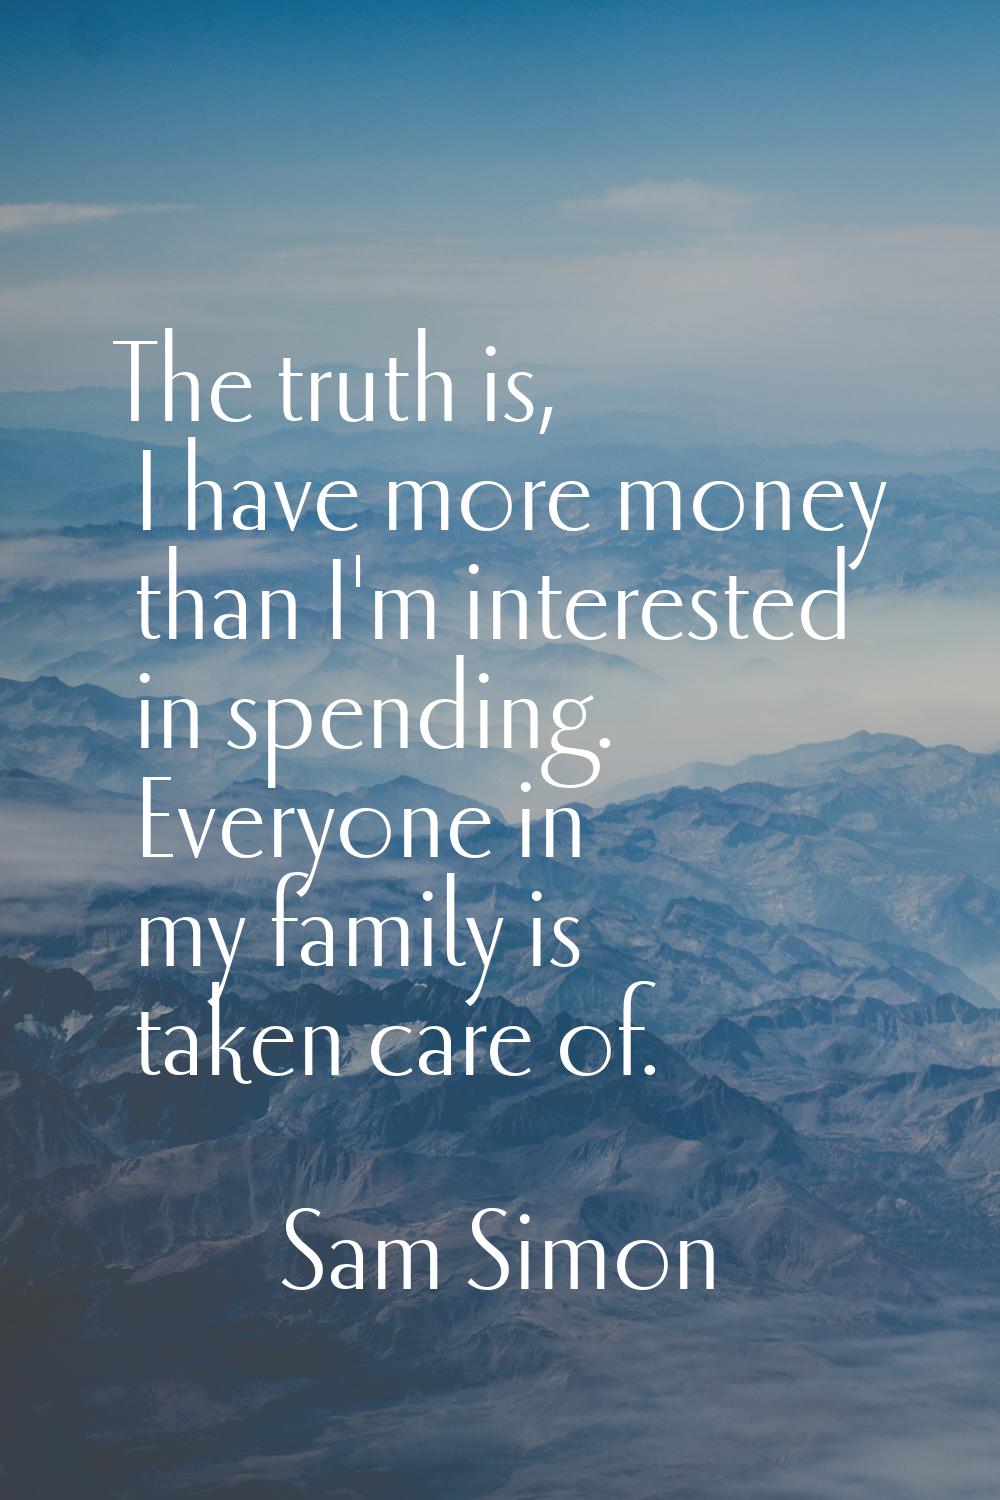 The truth is, I have more money than I'm interested in spending. Everyone in my family is taken car